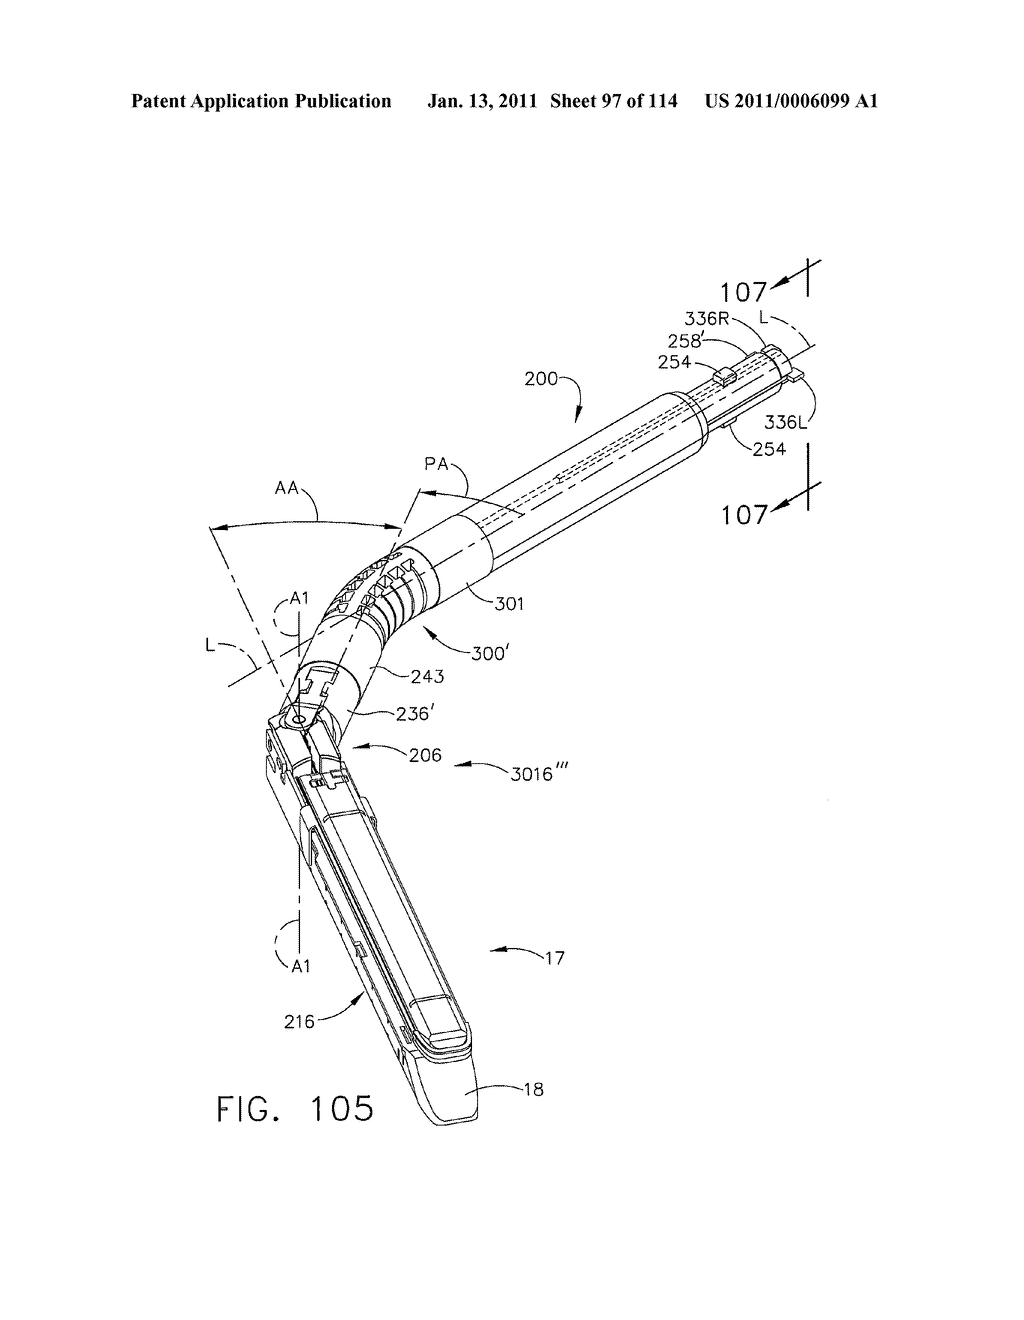 SURGICAL STAPLING APPARATUS WITH CONTROL FEATURES OPERABLE WITH ONE HAND - diagram, schematic, and image 98